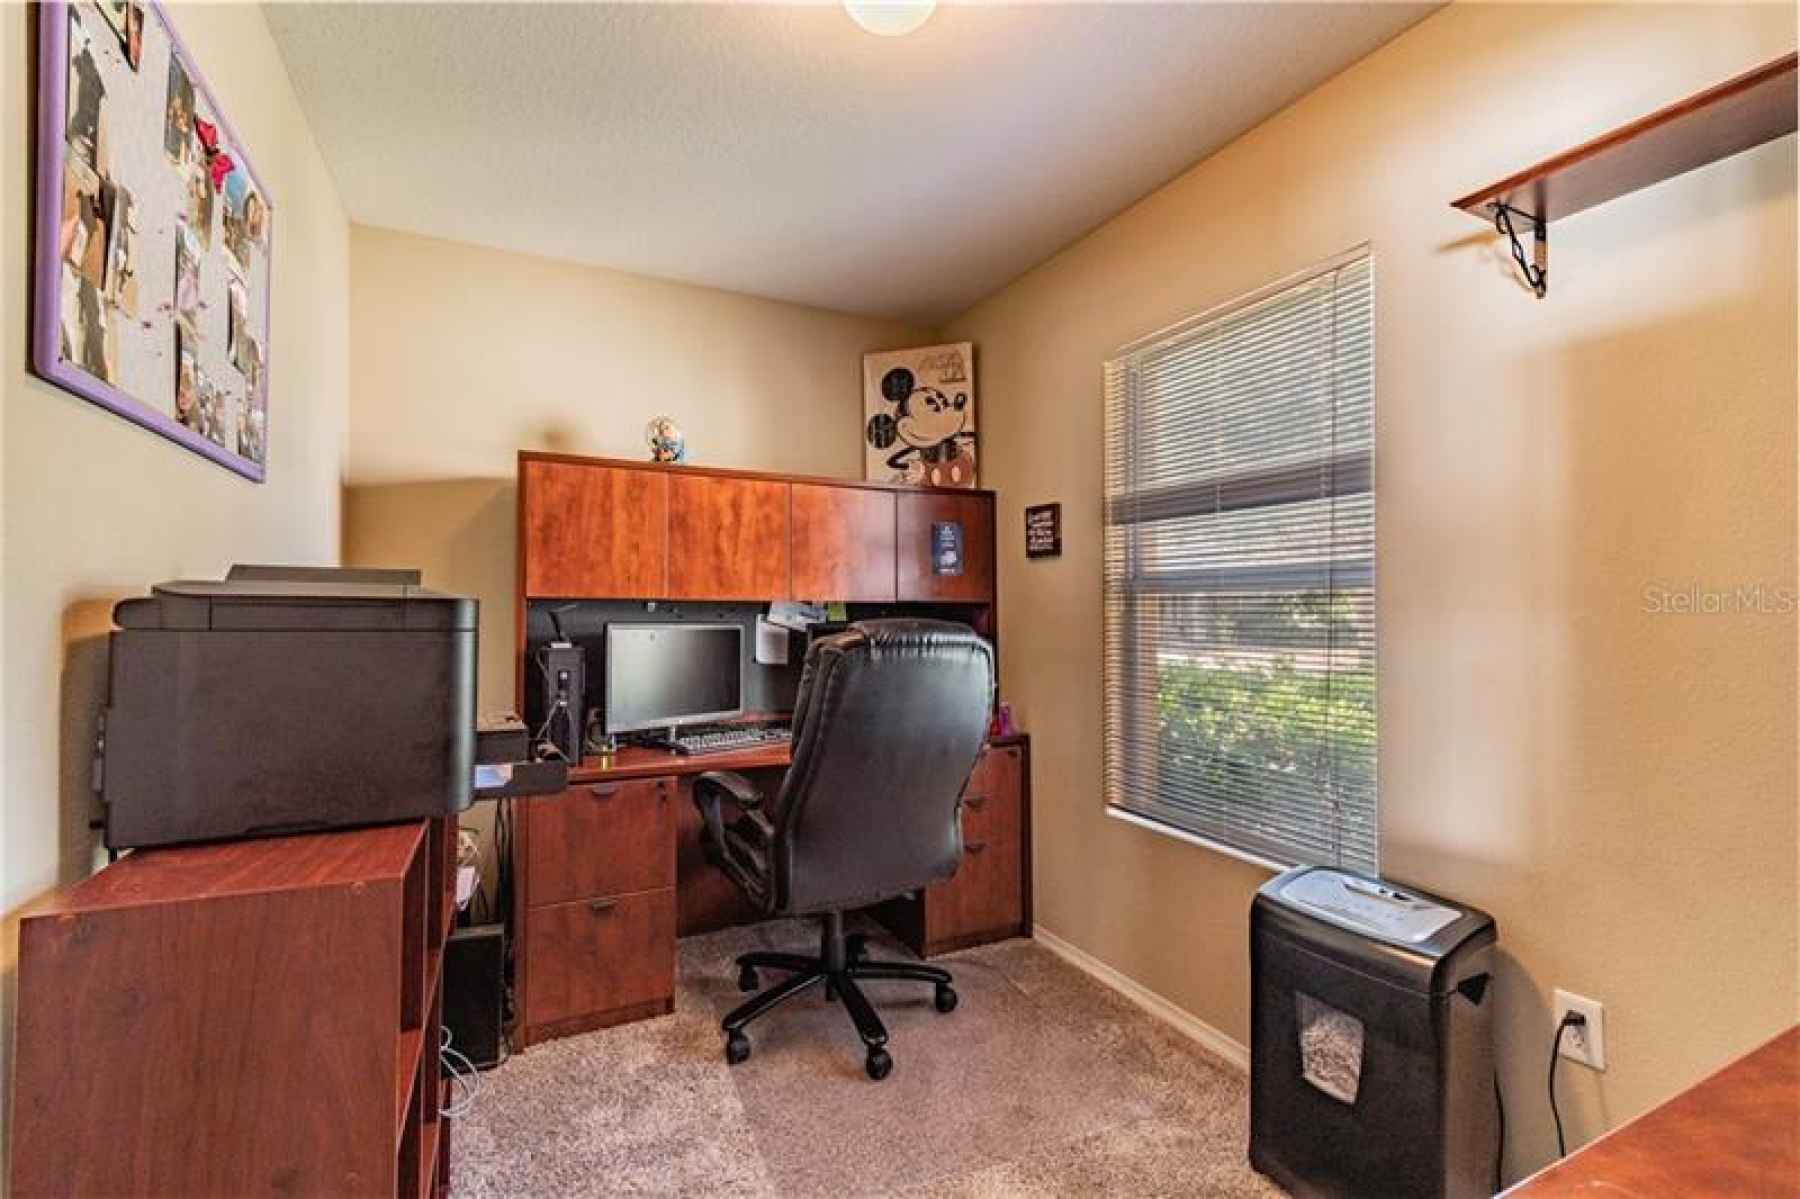 1st Floor Office is Just inside the Front door and across from the stairs.